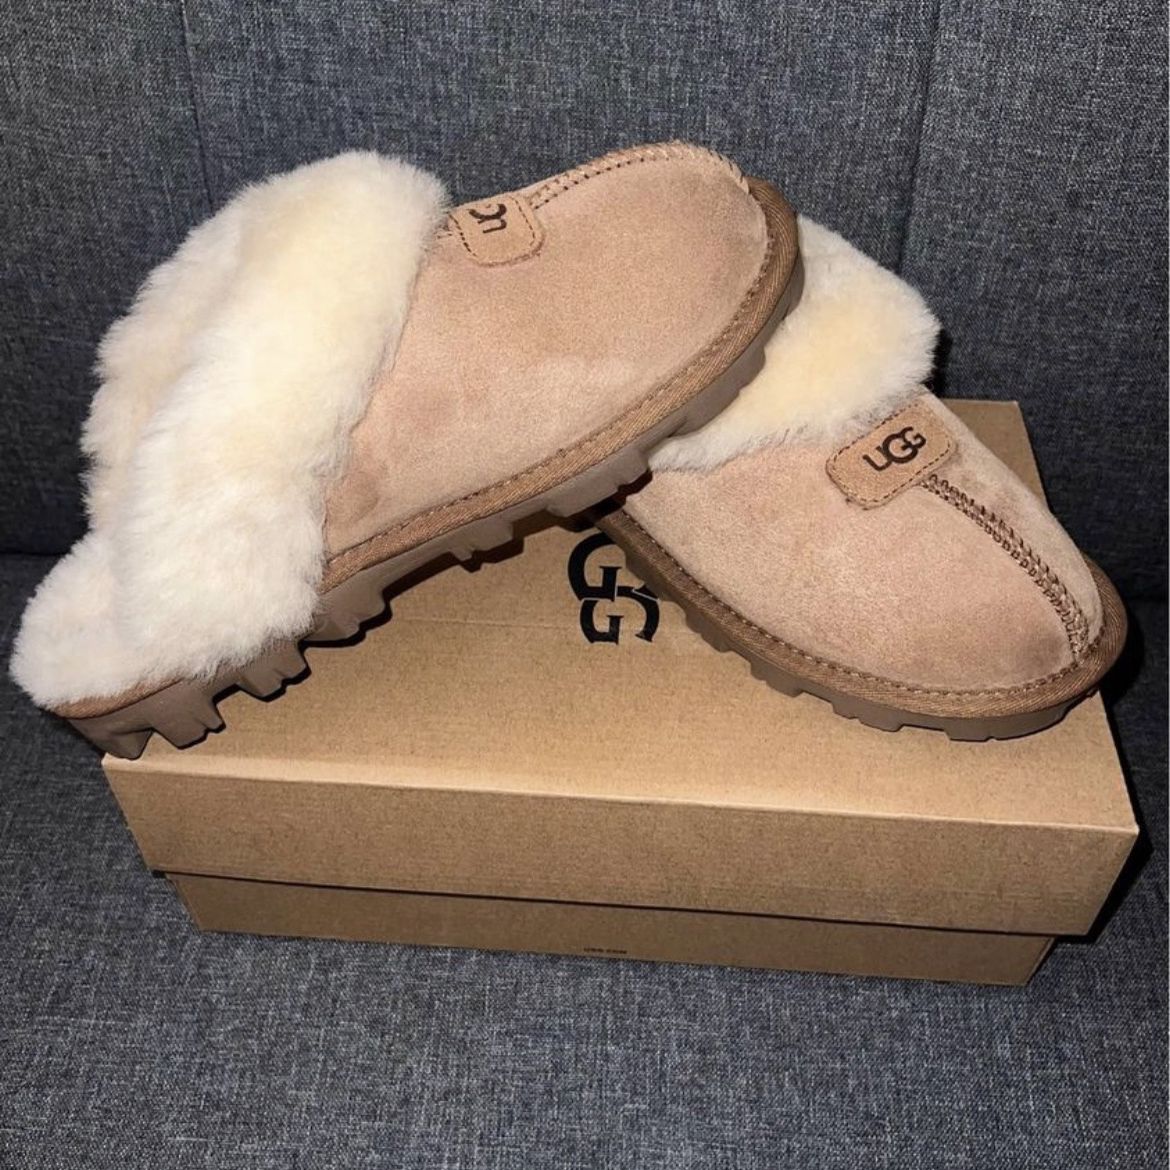 Uggs Coquette Size 6,7,8, Woman’s New 